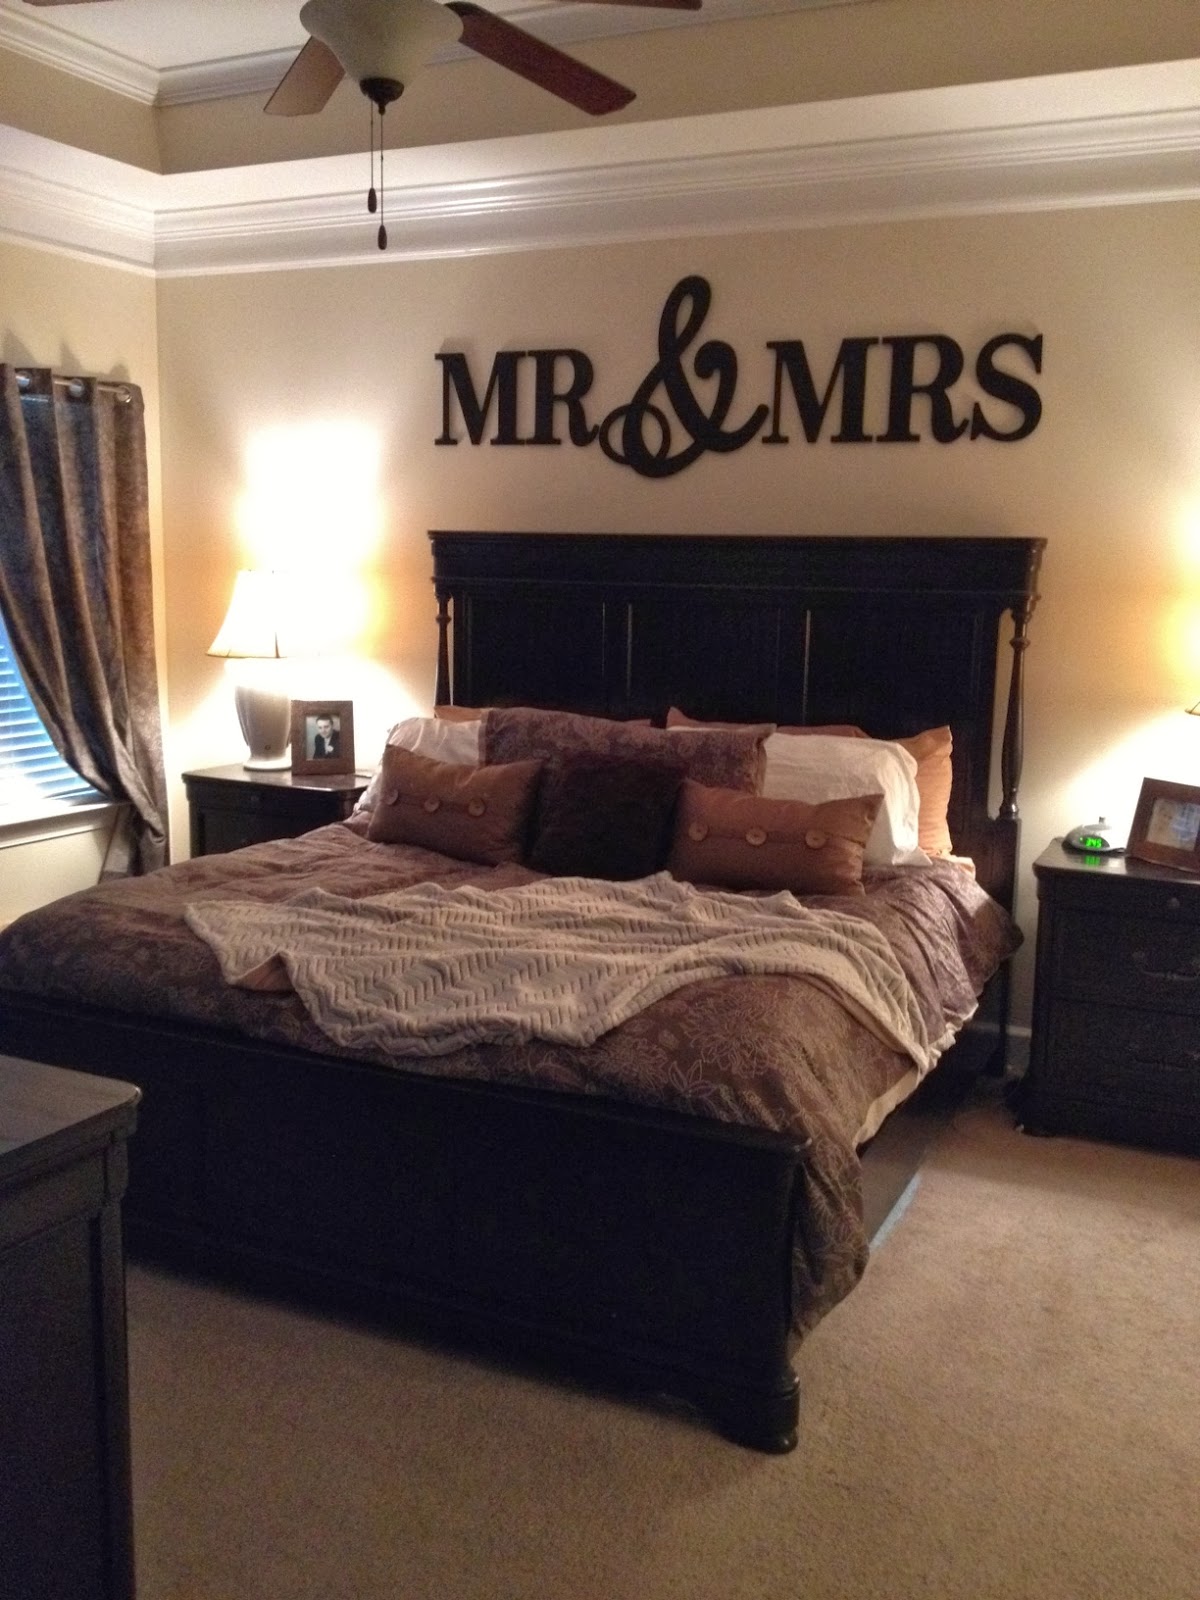 Large Wooden Mr & Mrs Wall Décor